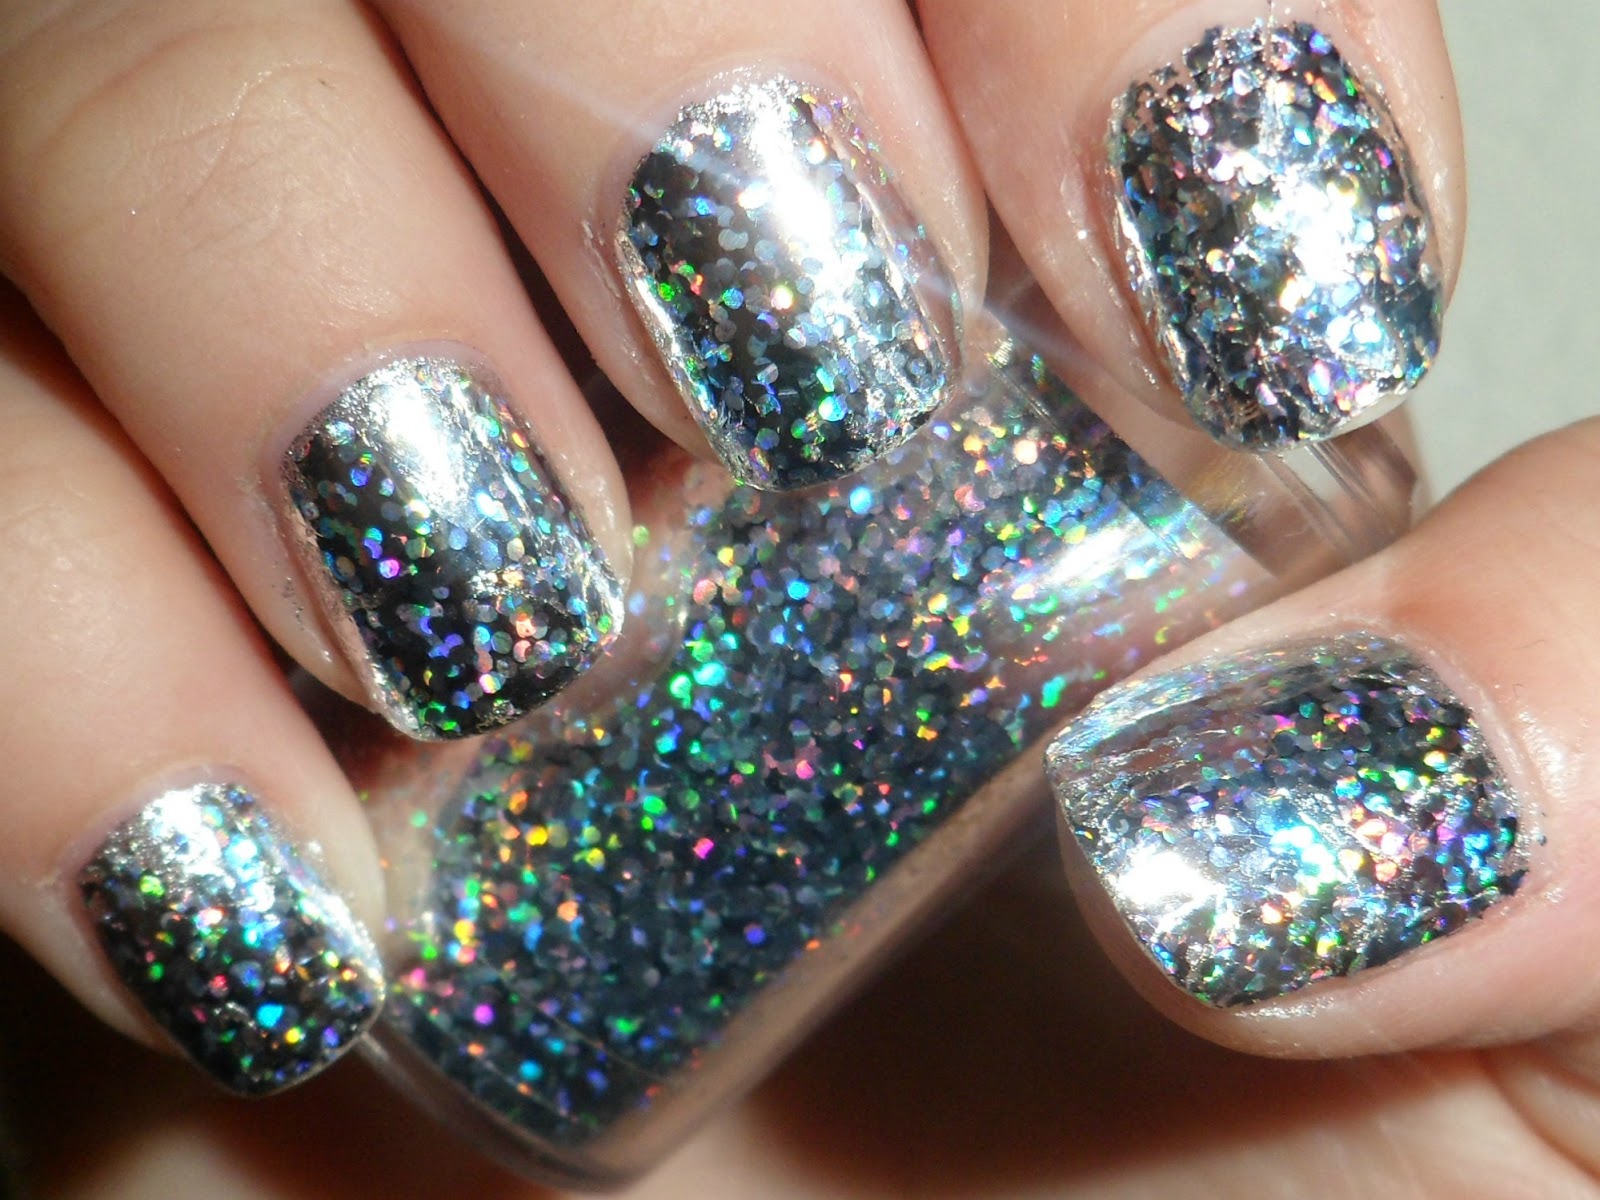 1. Foil Nail Art Designs for a Shiny and Chic Manicure - wide 2